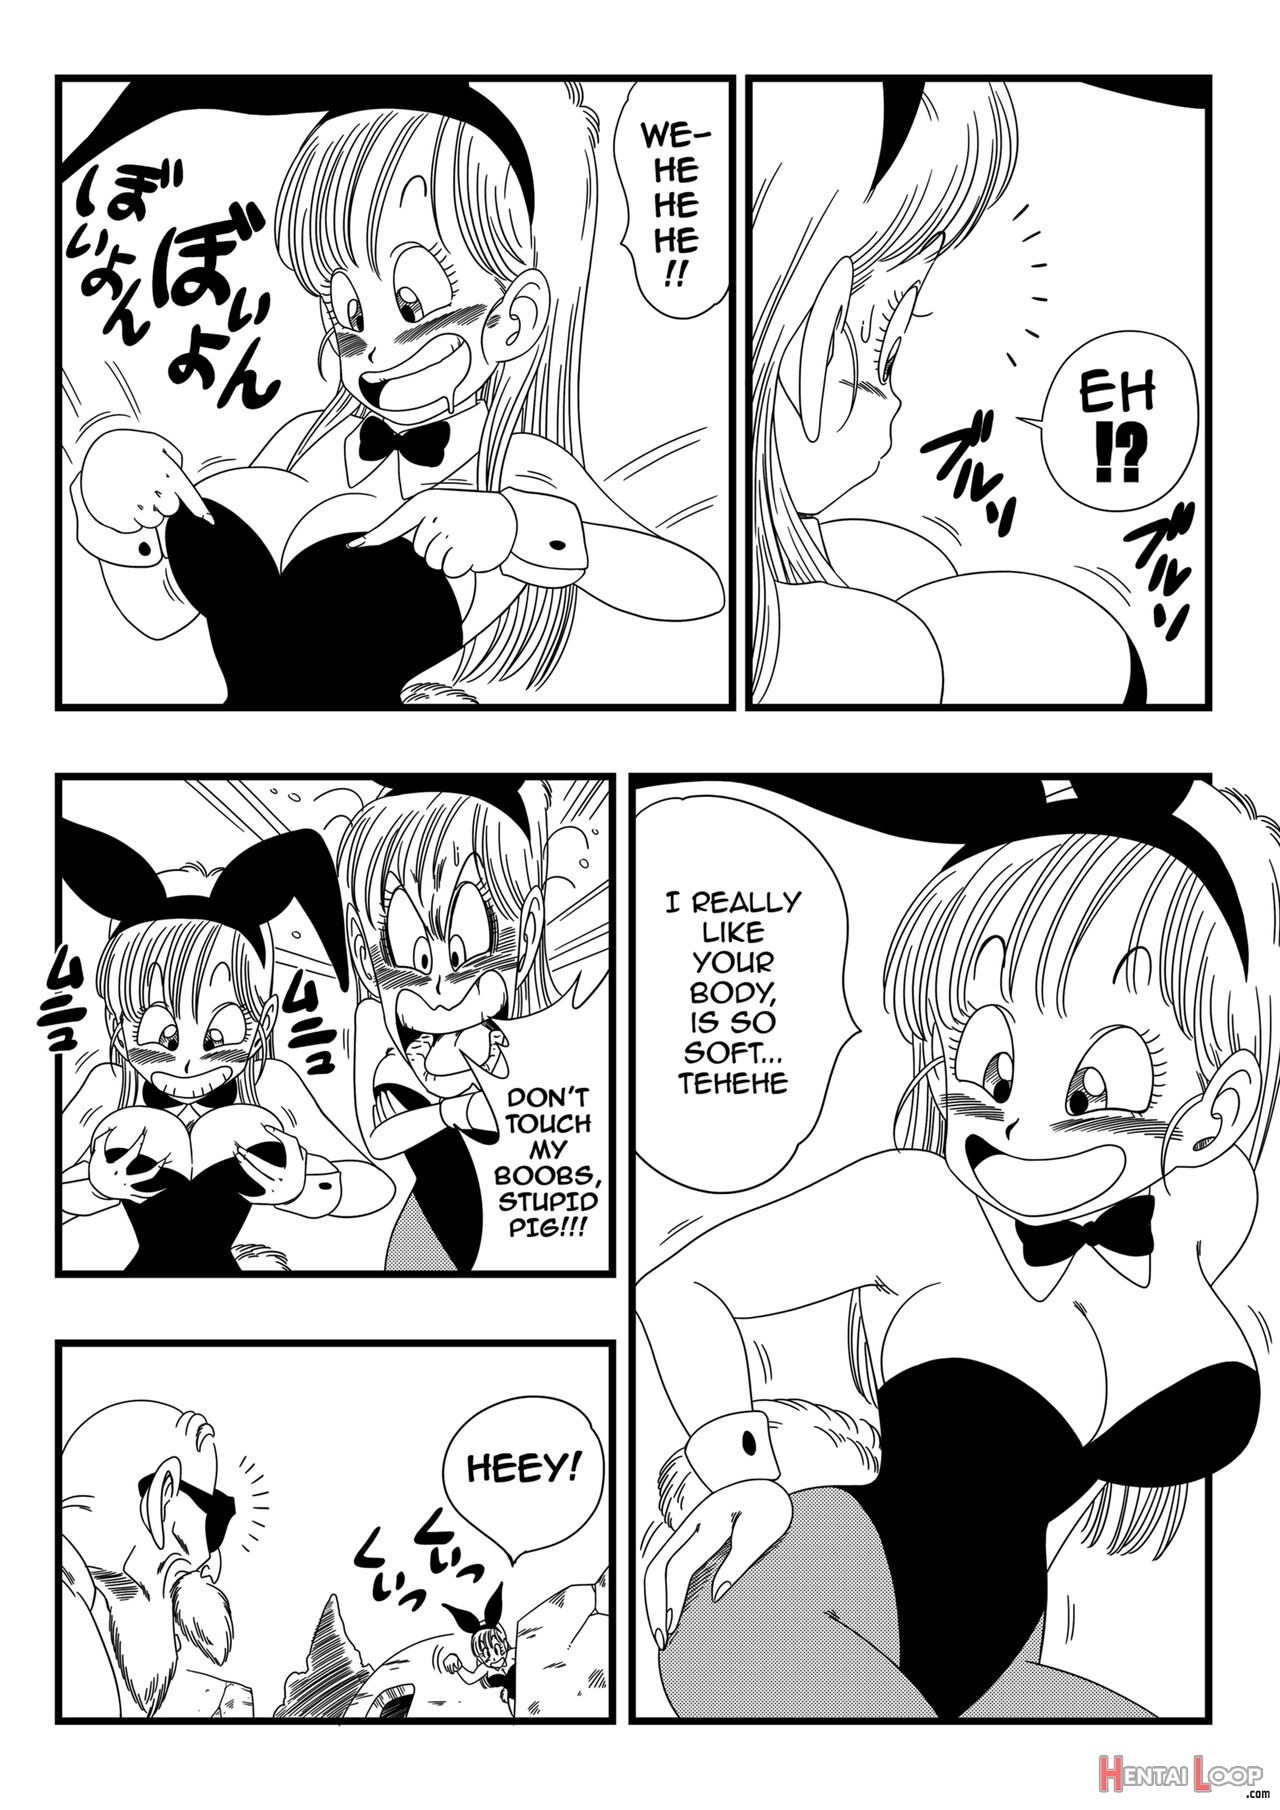 Bunny Girl Transformation page 6